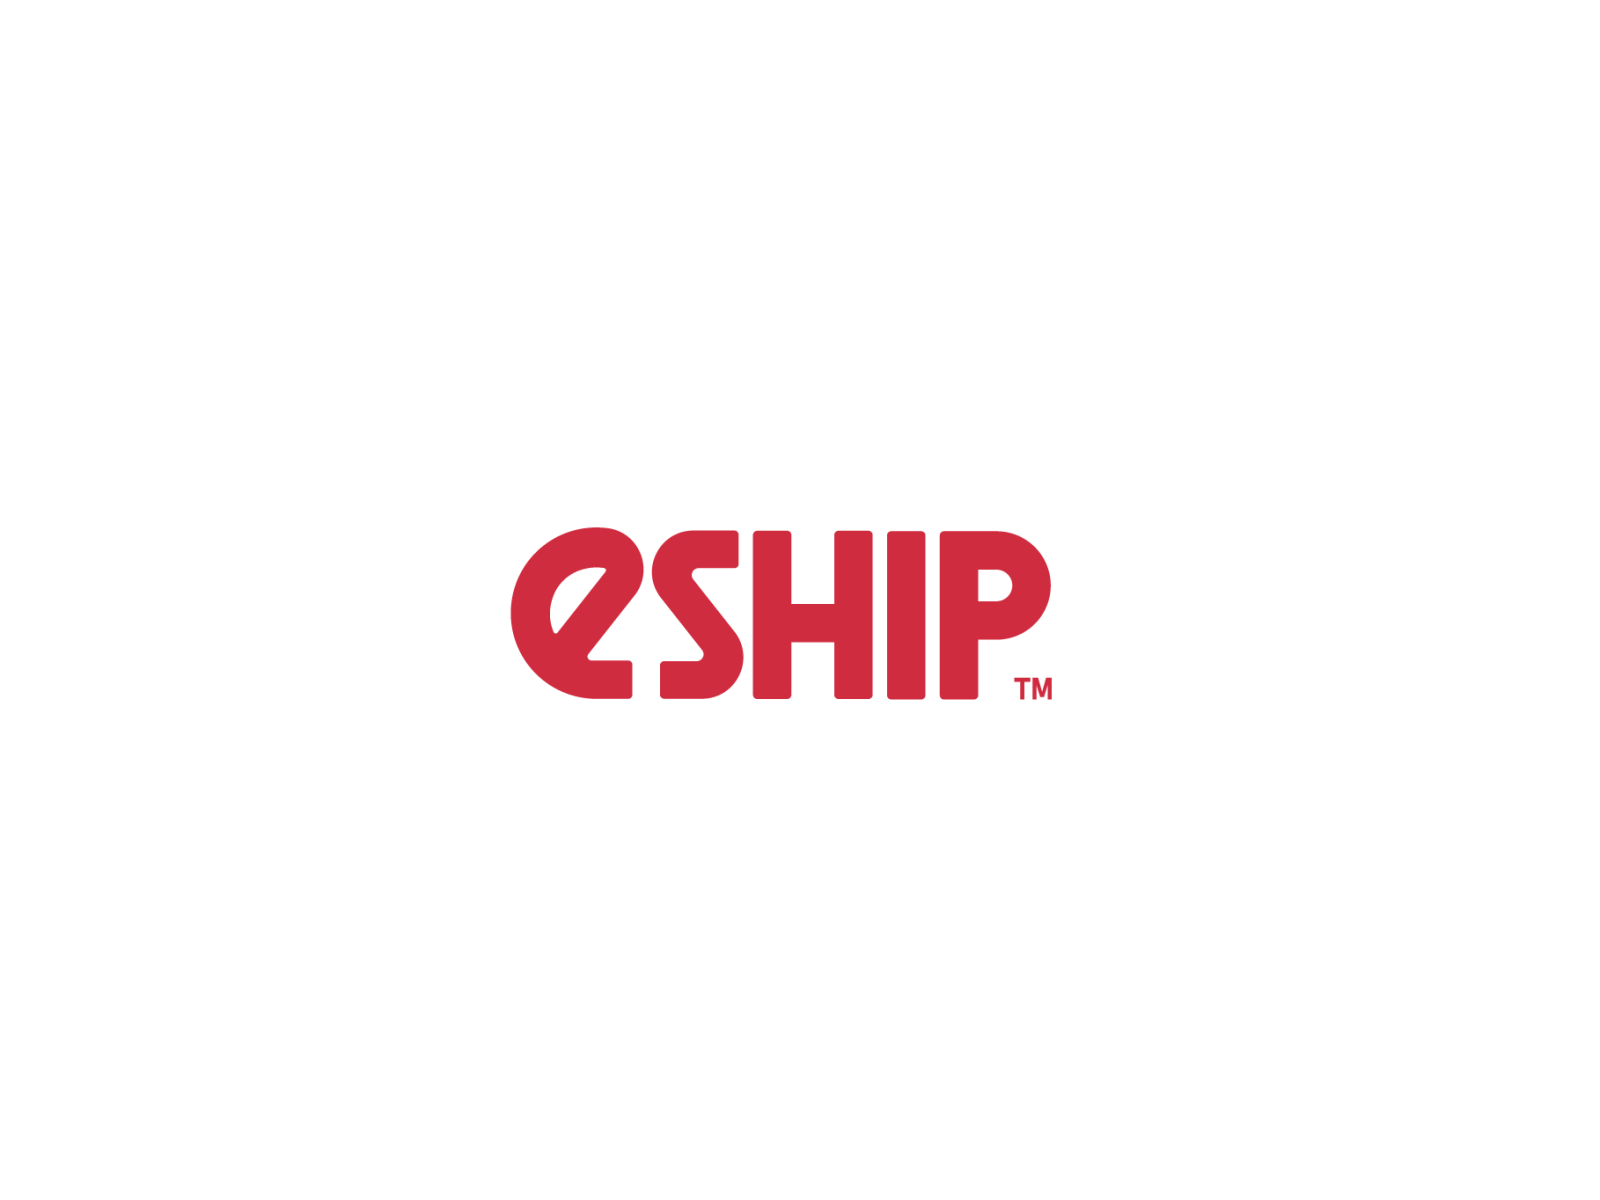 Eship Shipping App By Trungdungworks On Dribbble